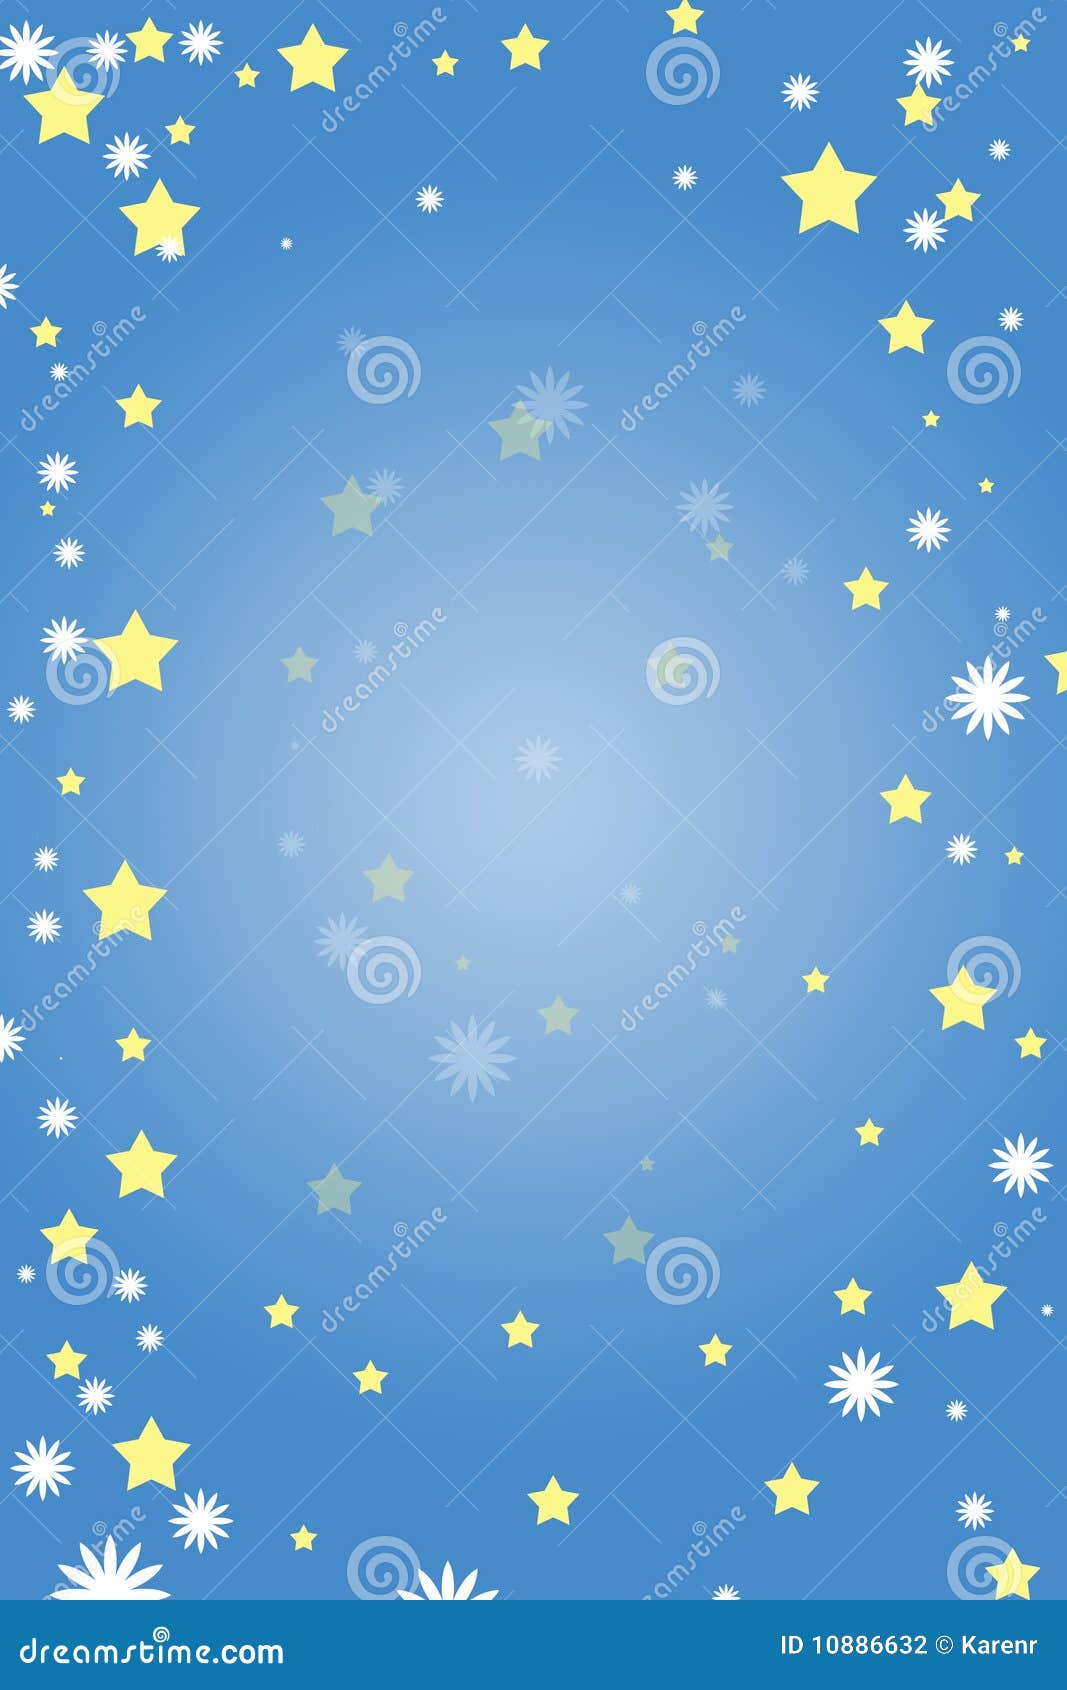 Night time Background stock photo. Image of cold, yellow - 10886632